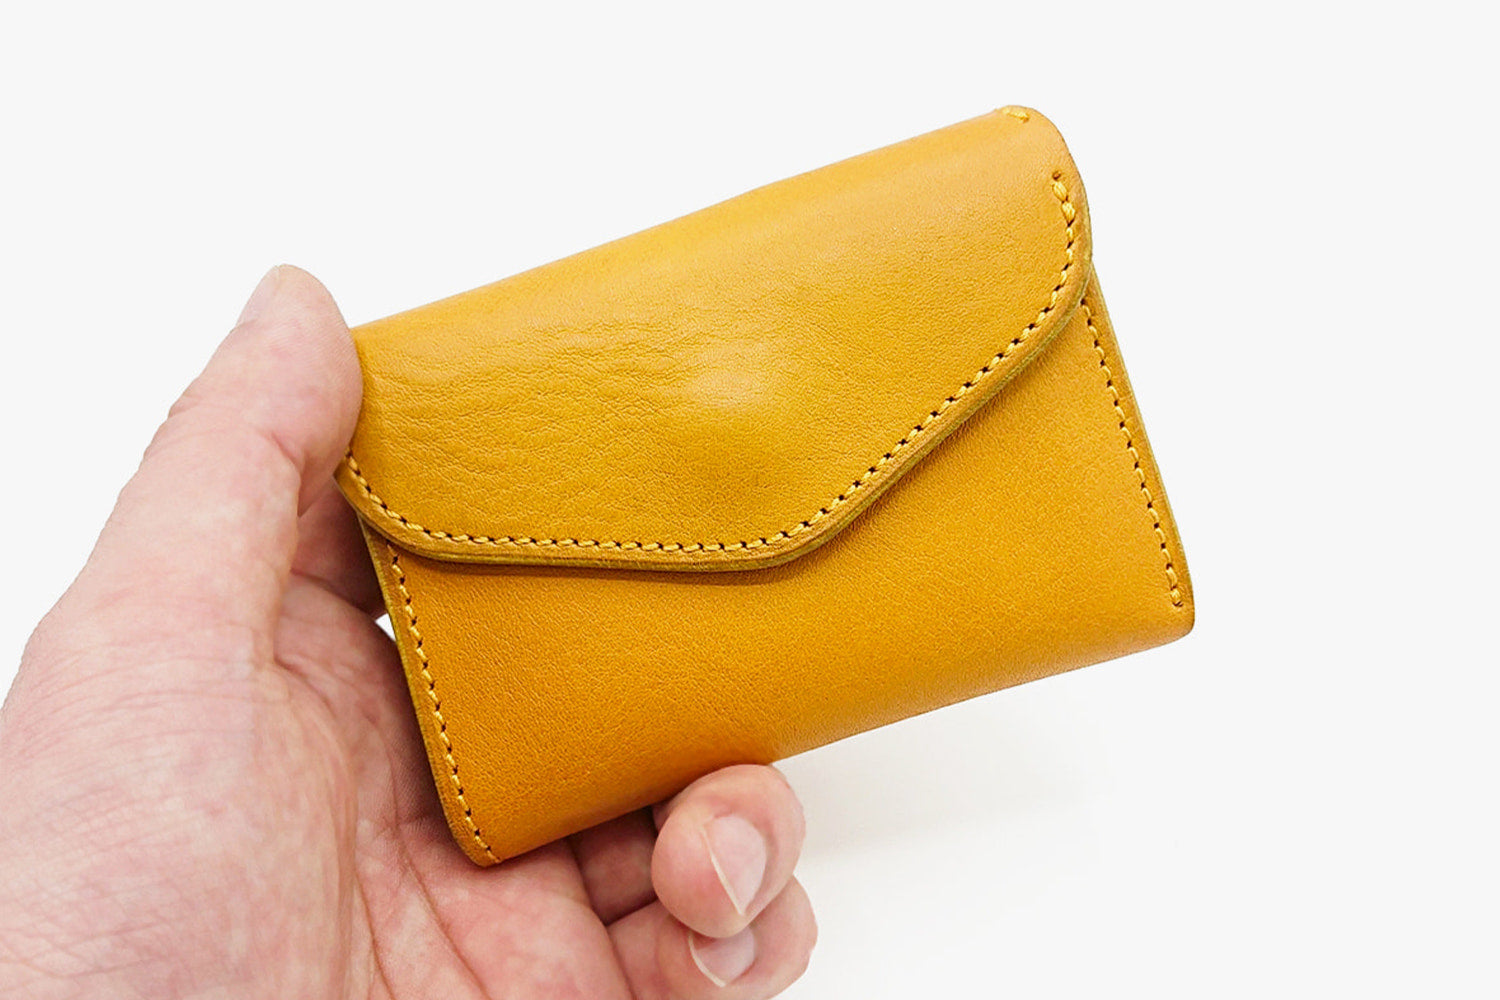 CRAMP / Ikenohata Ginzaten Italian shrink leather with a rich expression. Compact card case sized wallet 